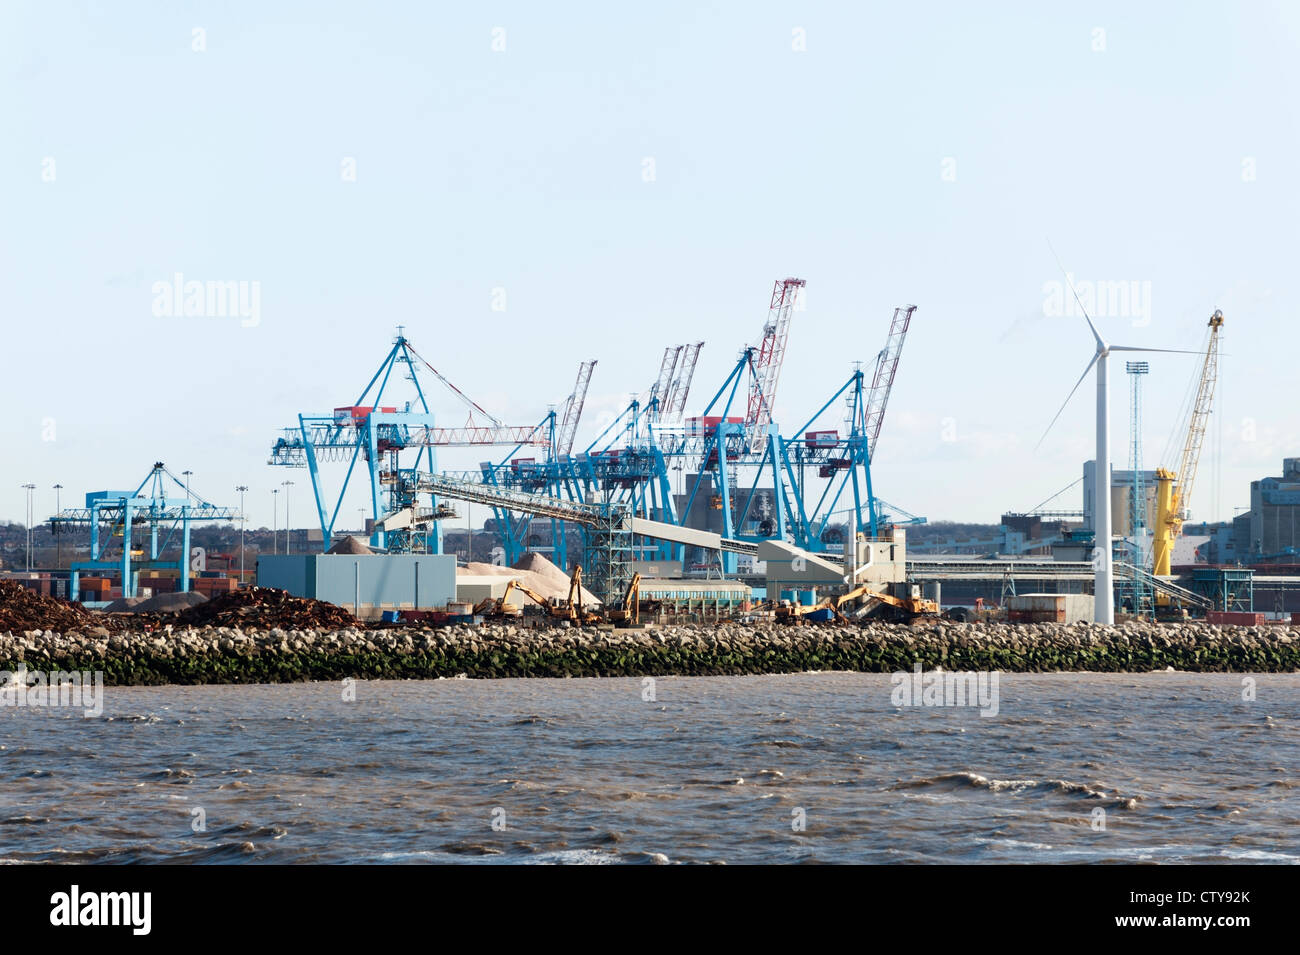 Cranes and lifting gear at the Port of Liverpool Seaforth container docks Stock Photo